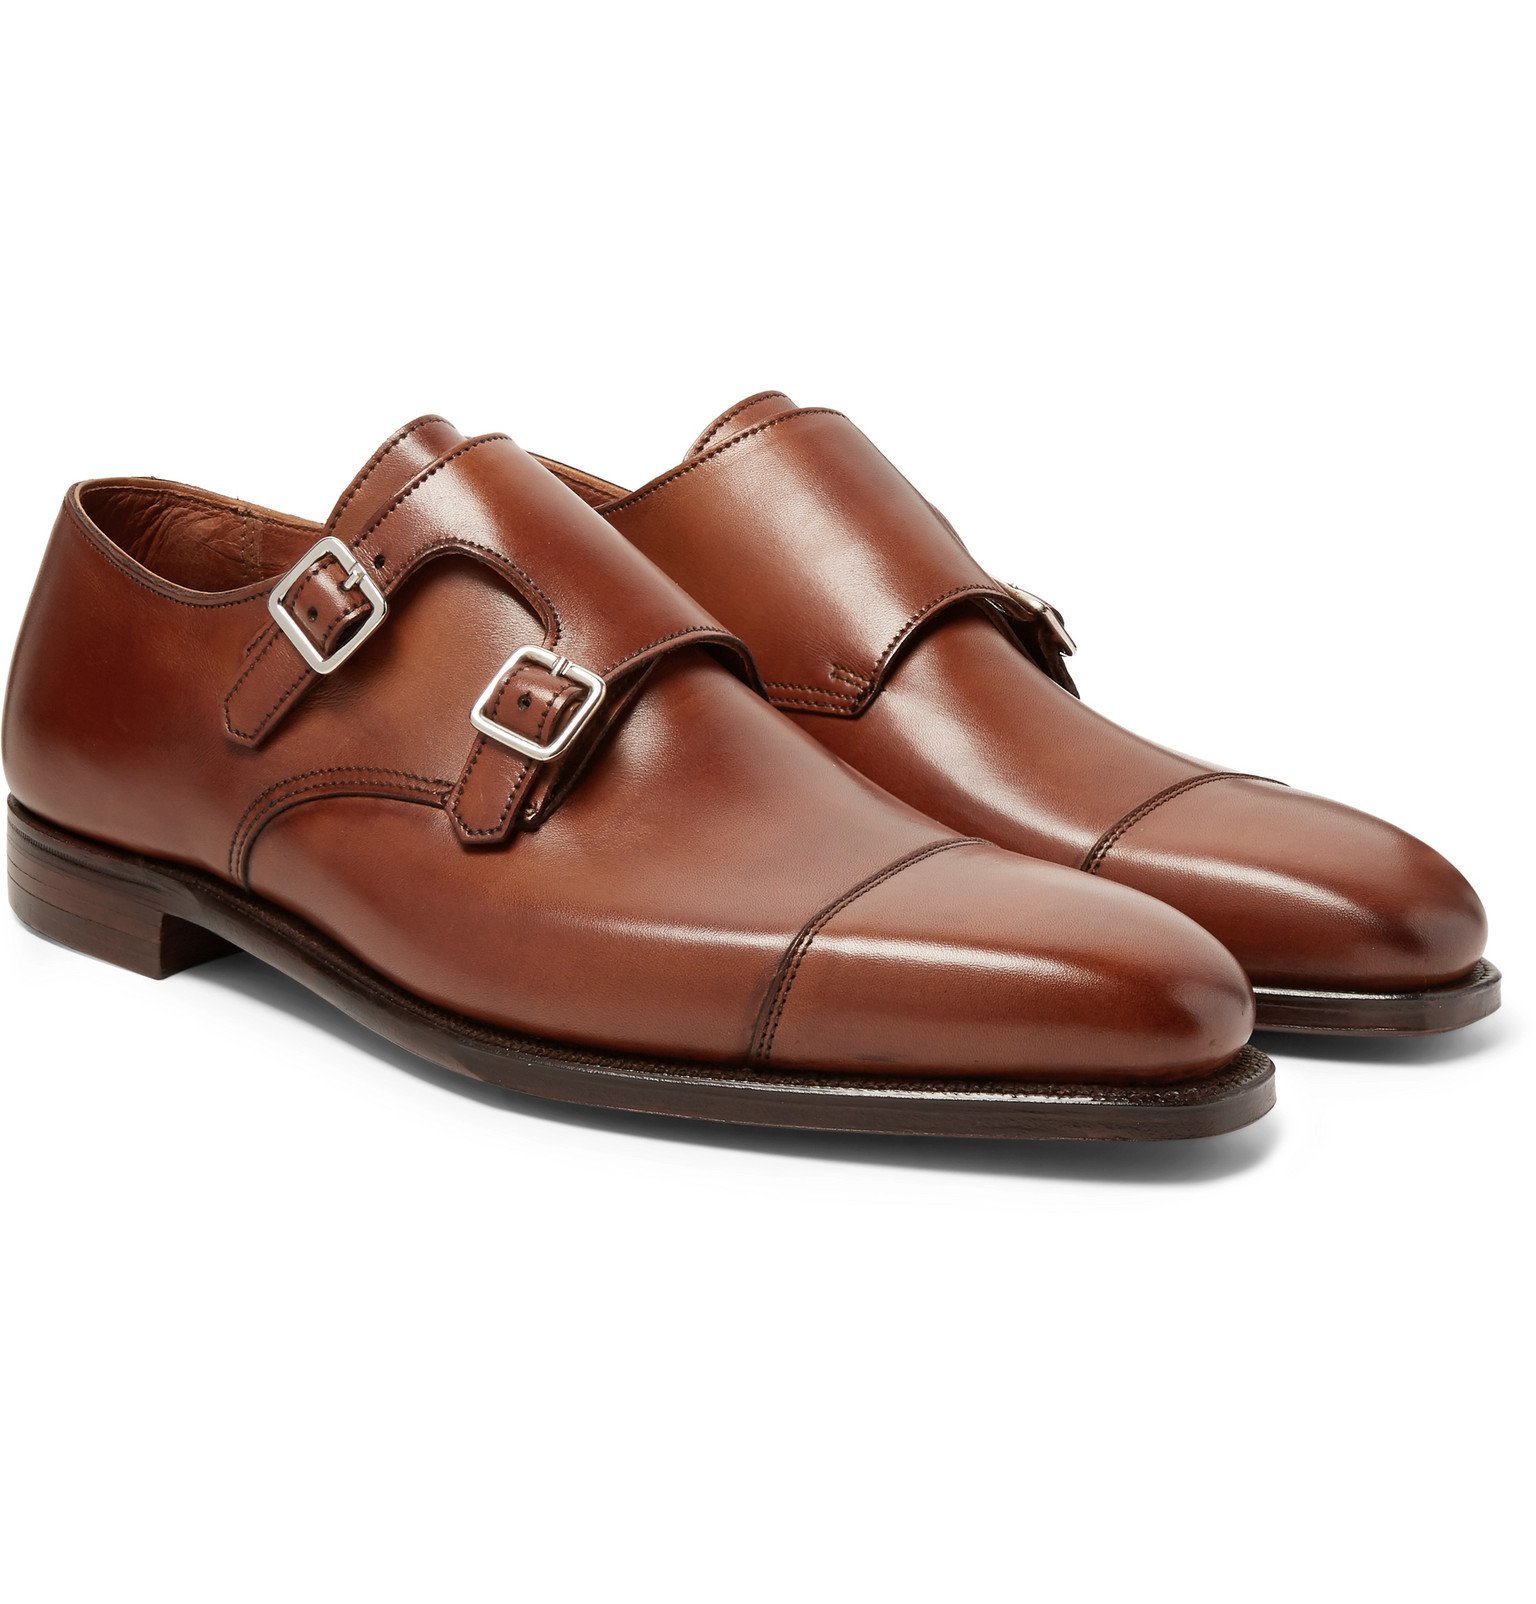 George Cleverley - Thomas Cap-Toe Leather Monk-Strap Shoes - Brown ...